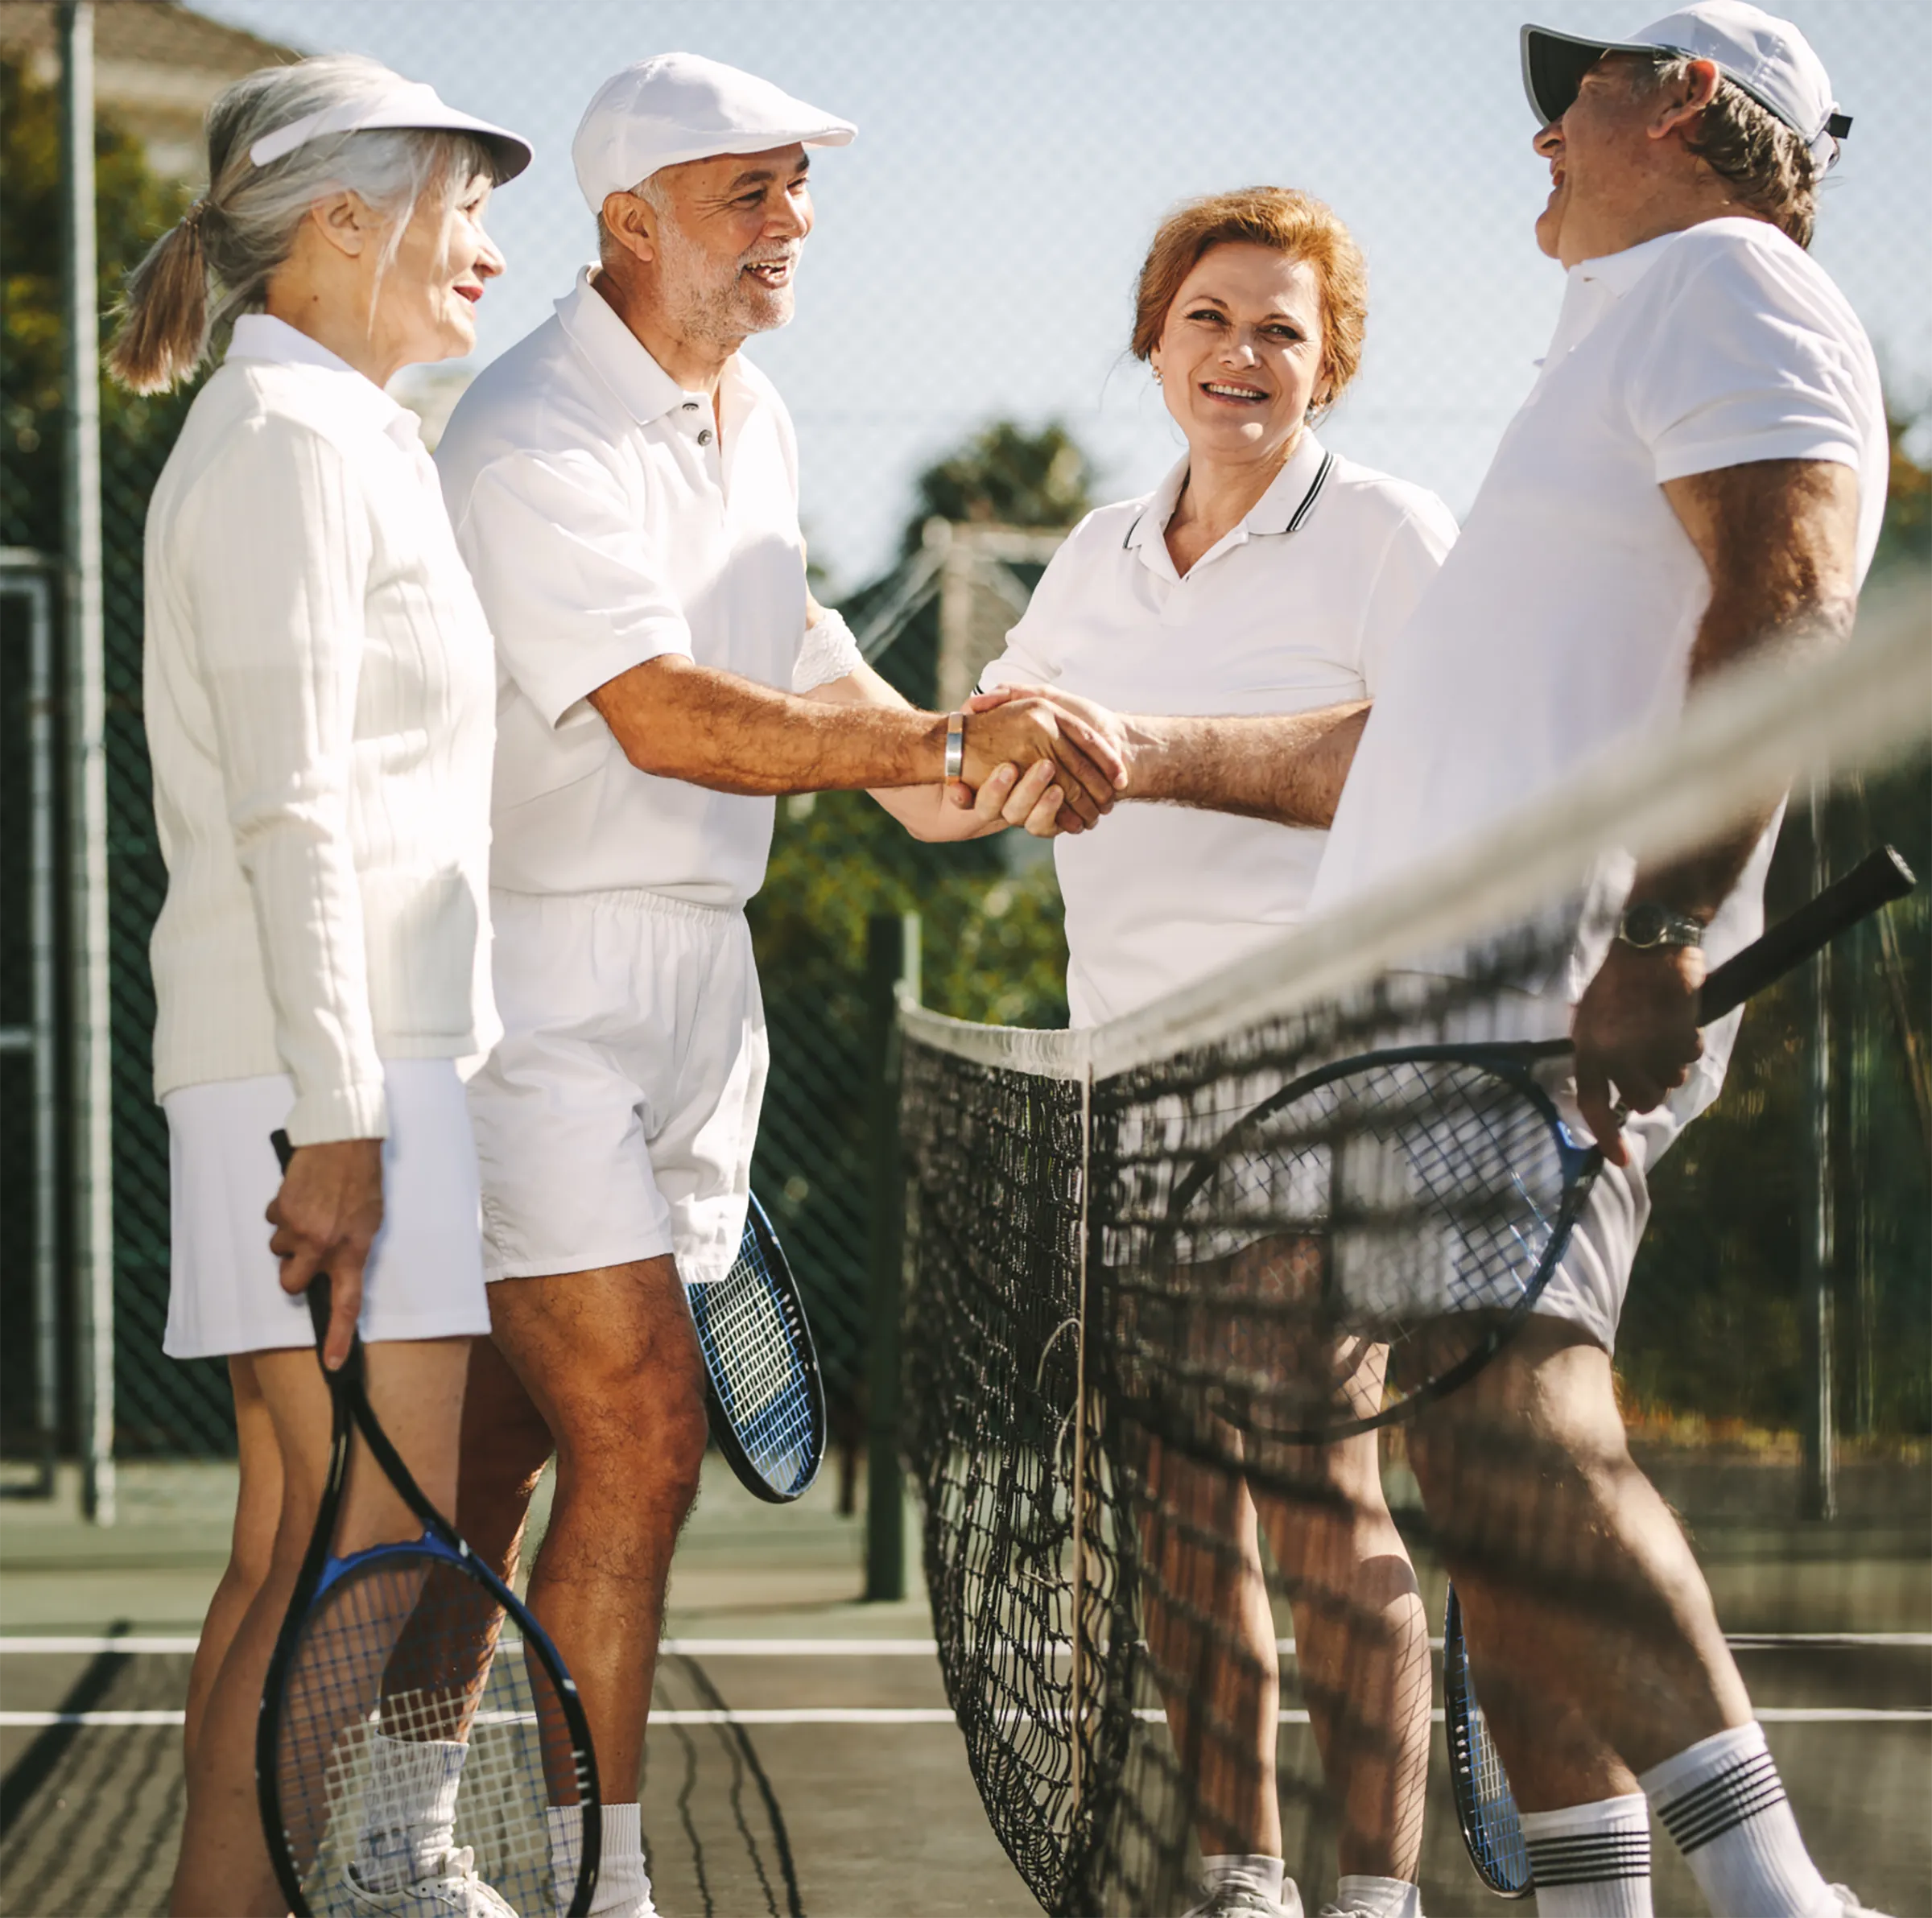 A group of residents on a tennis court shaking hands across the net